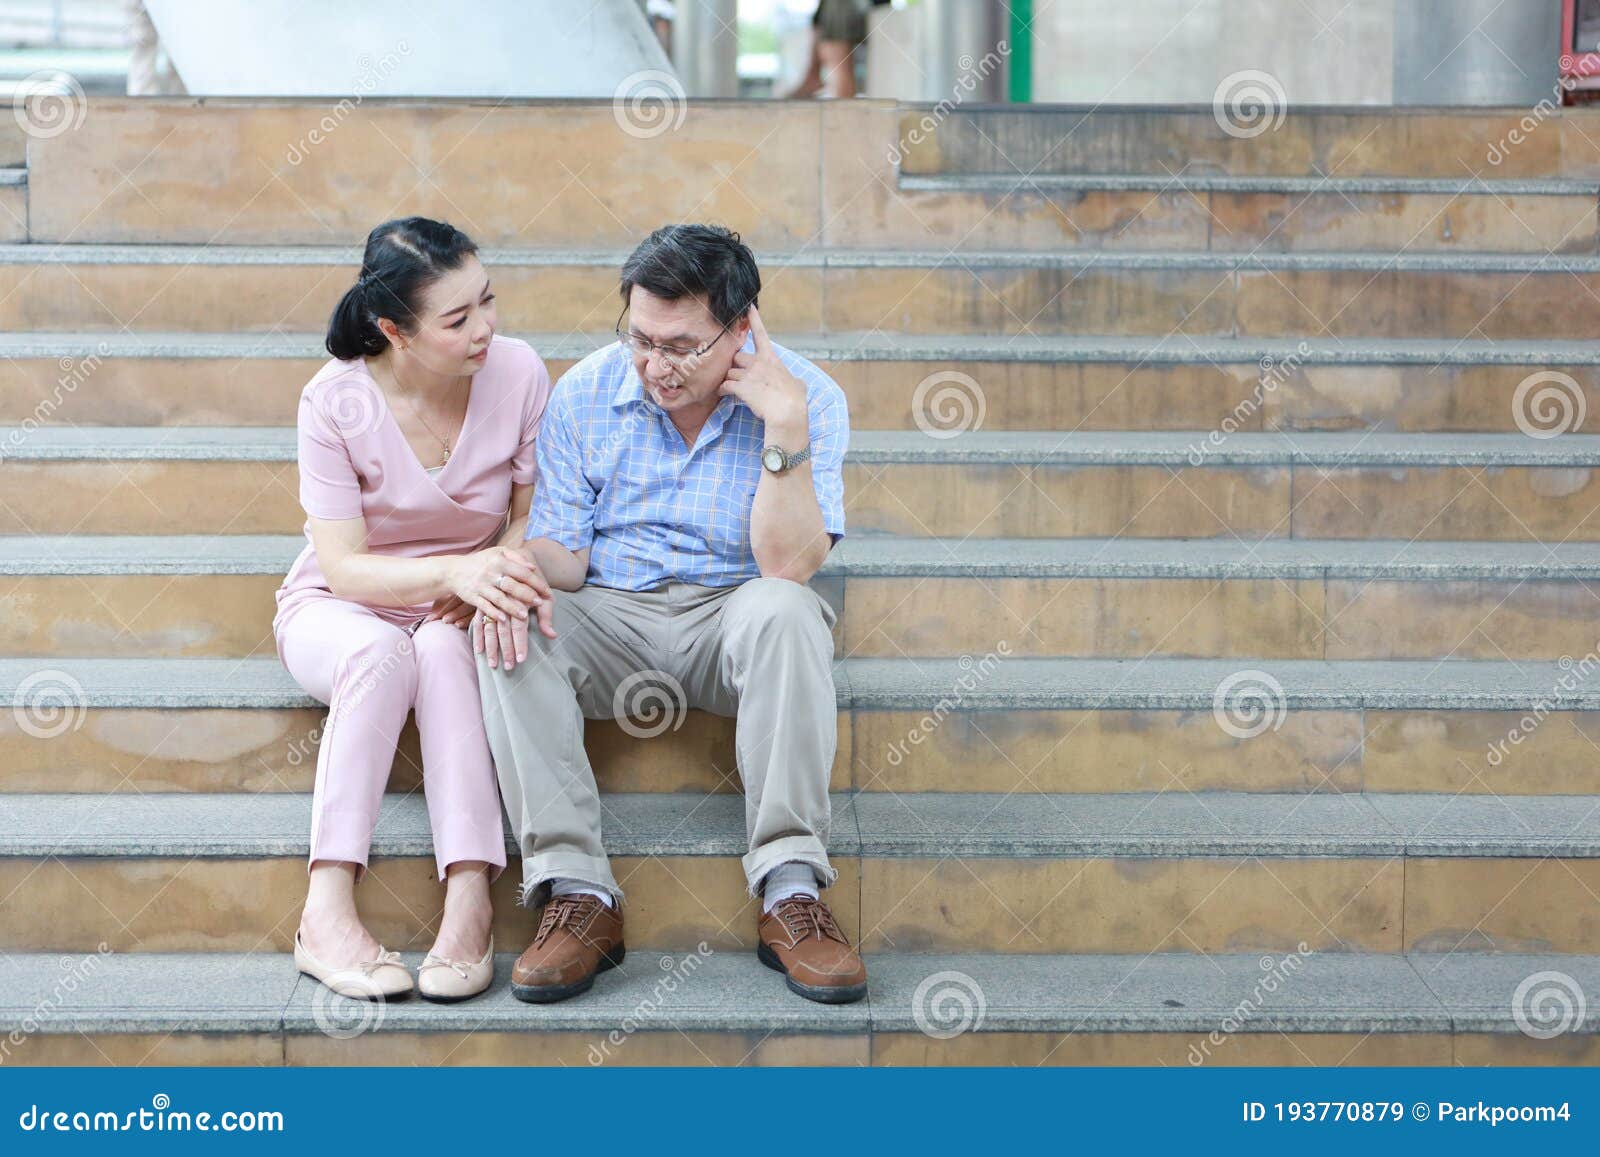 Elderly Asian Wife Is Comforting Elder Asian Husband And Put Her Hand